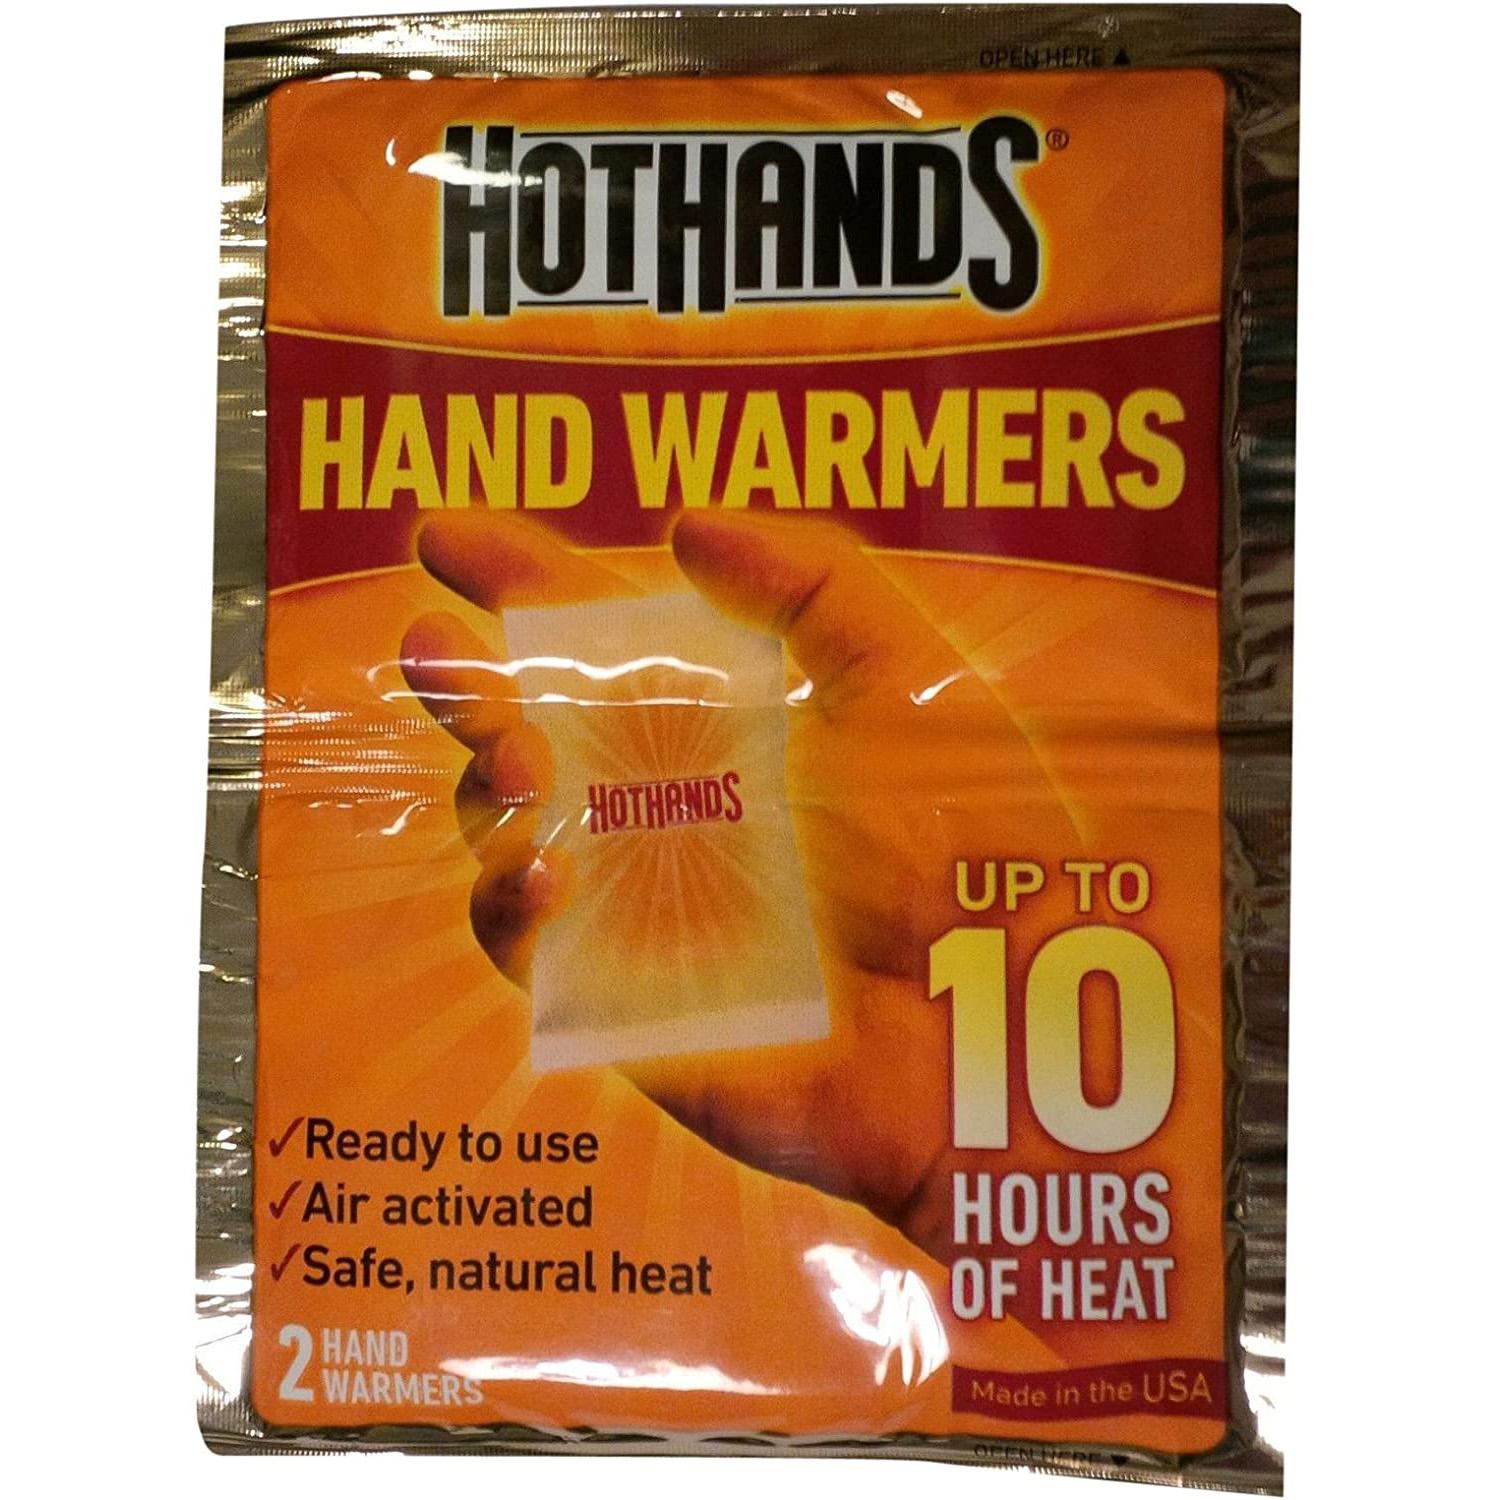 2 HeatMax HotHands Hand Warmers for $0.74